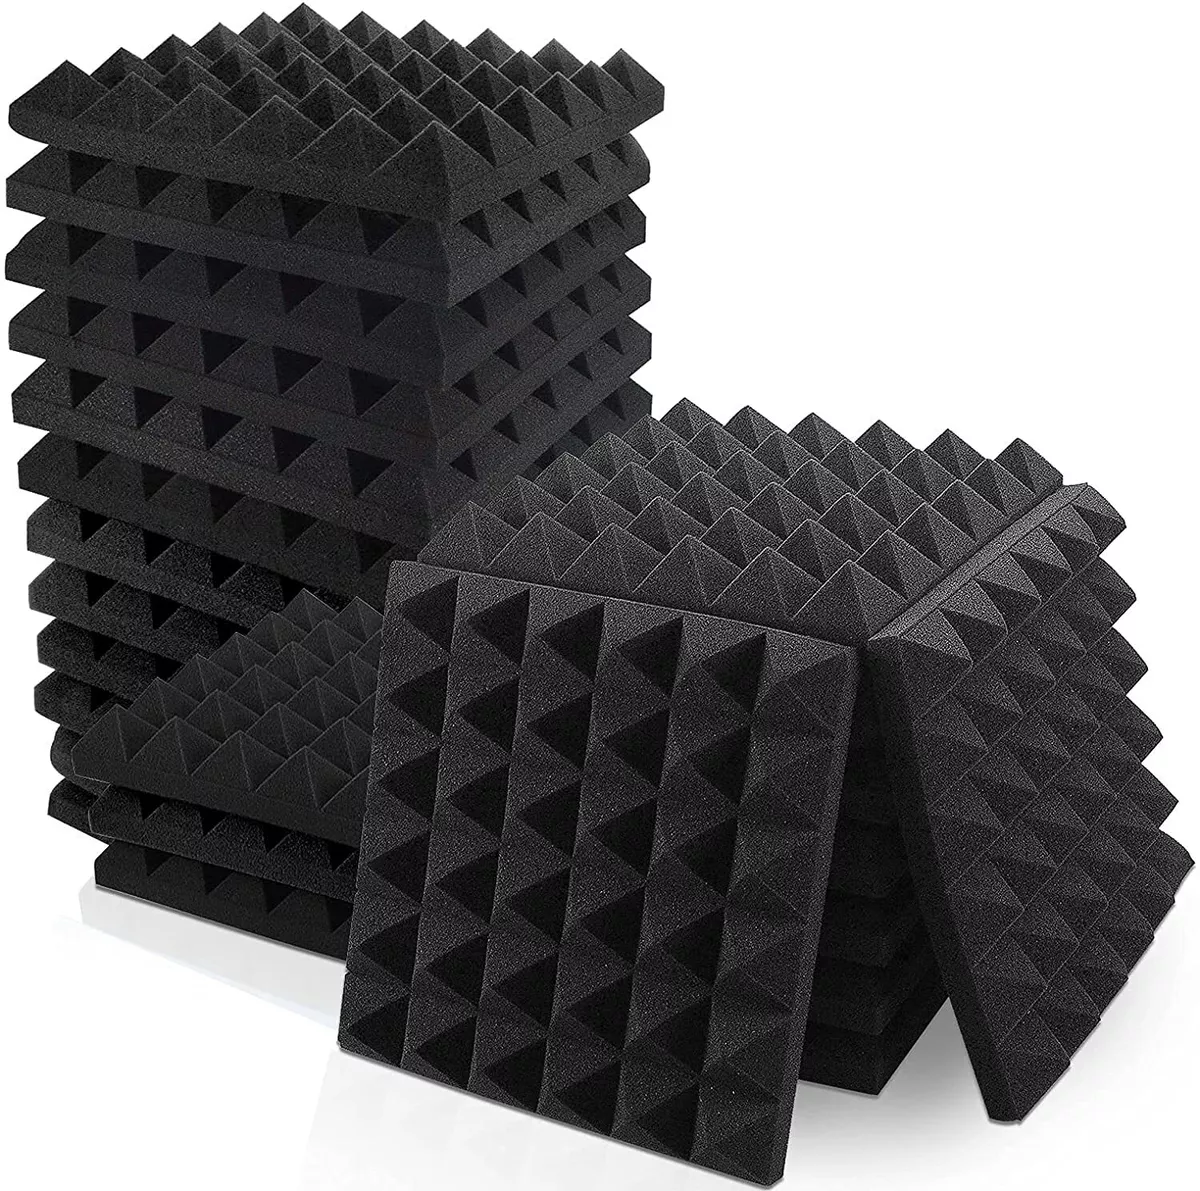 Acoustic Foam Panels (1x1 Ft) Studio Sound Absorbing Soundproofing 2 inch  Wedge